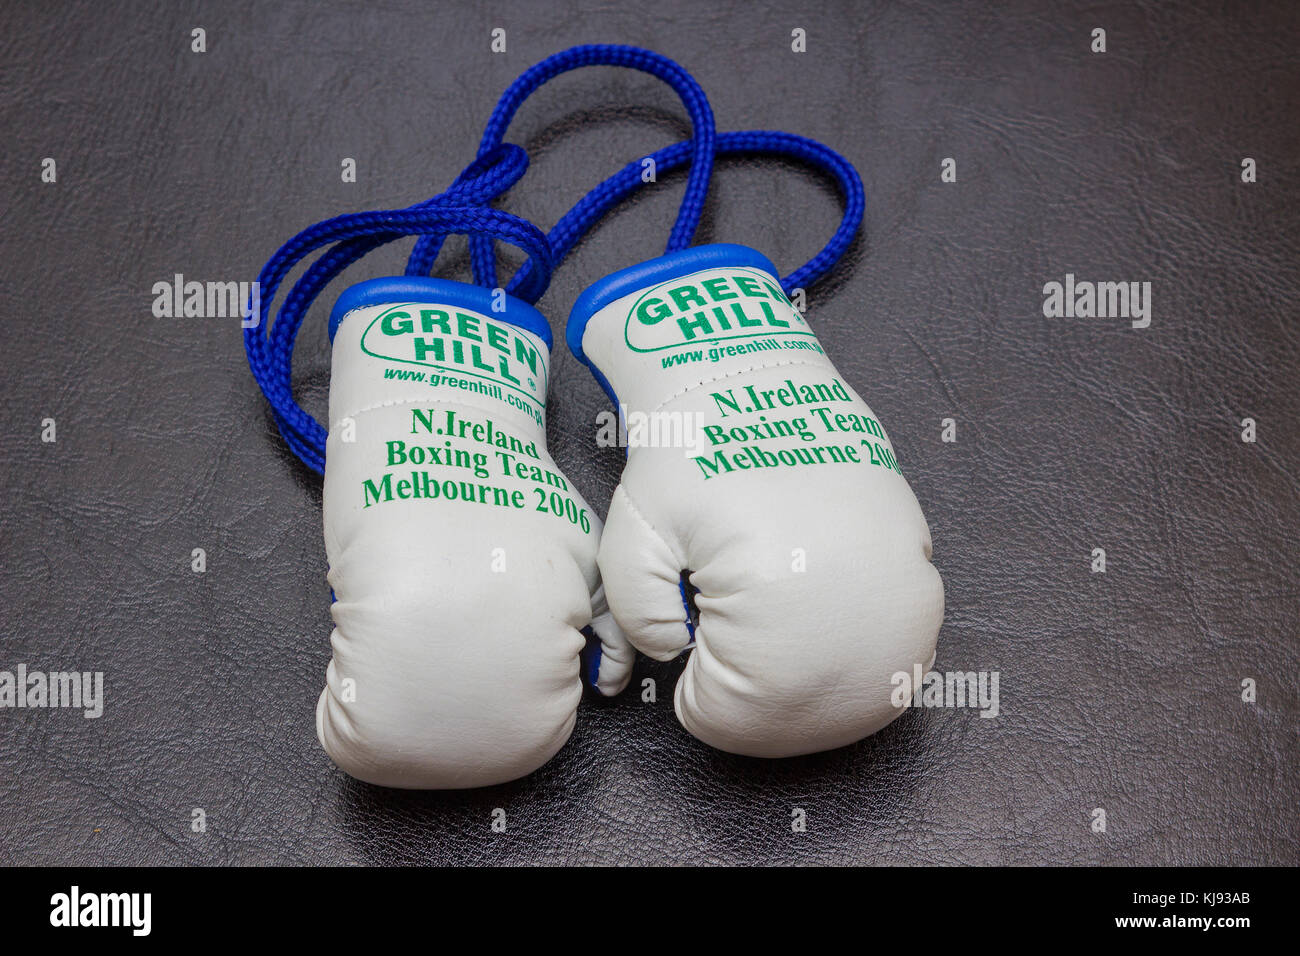 Northern Ireland boxing team miniature boxing gloves memorabilia from the 2006 Commonwealth Games held in Melbourne Australia Stock Photo